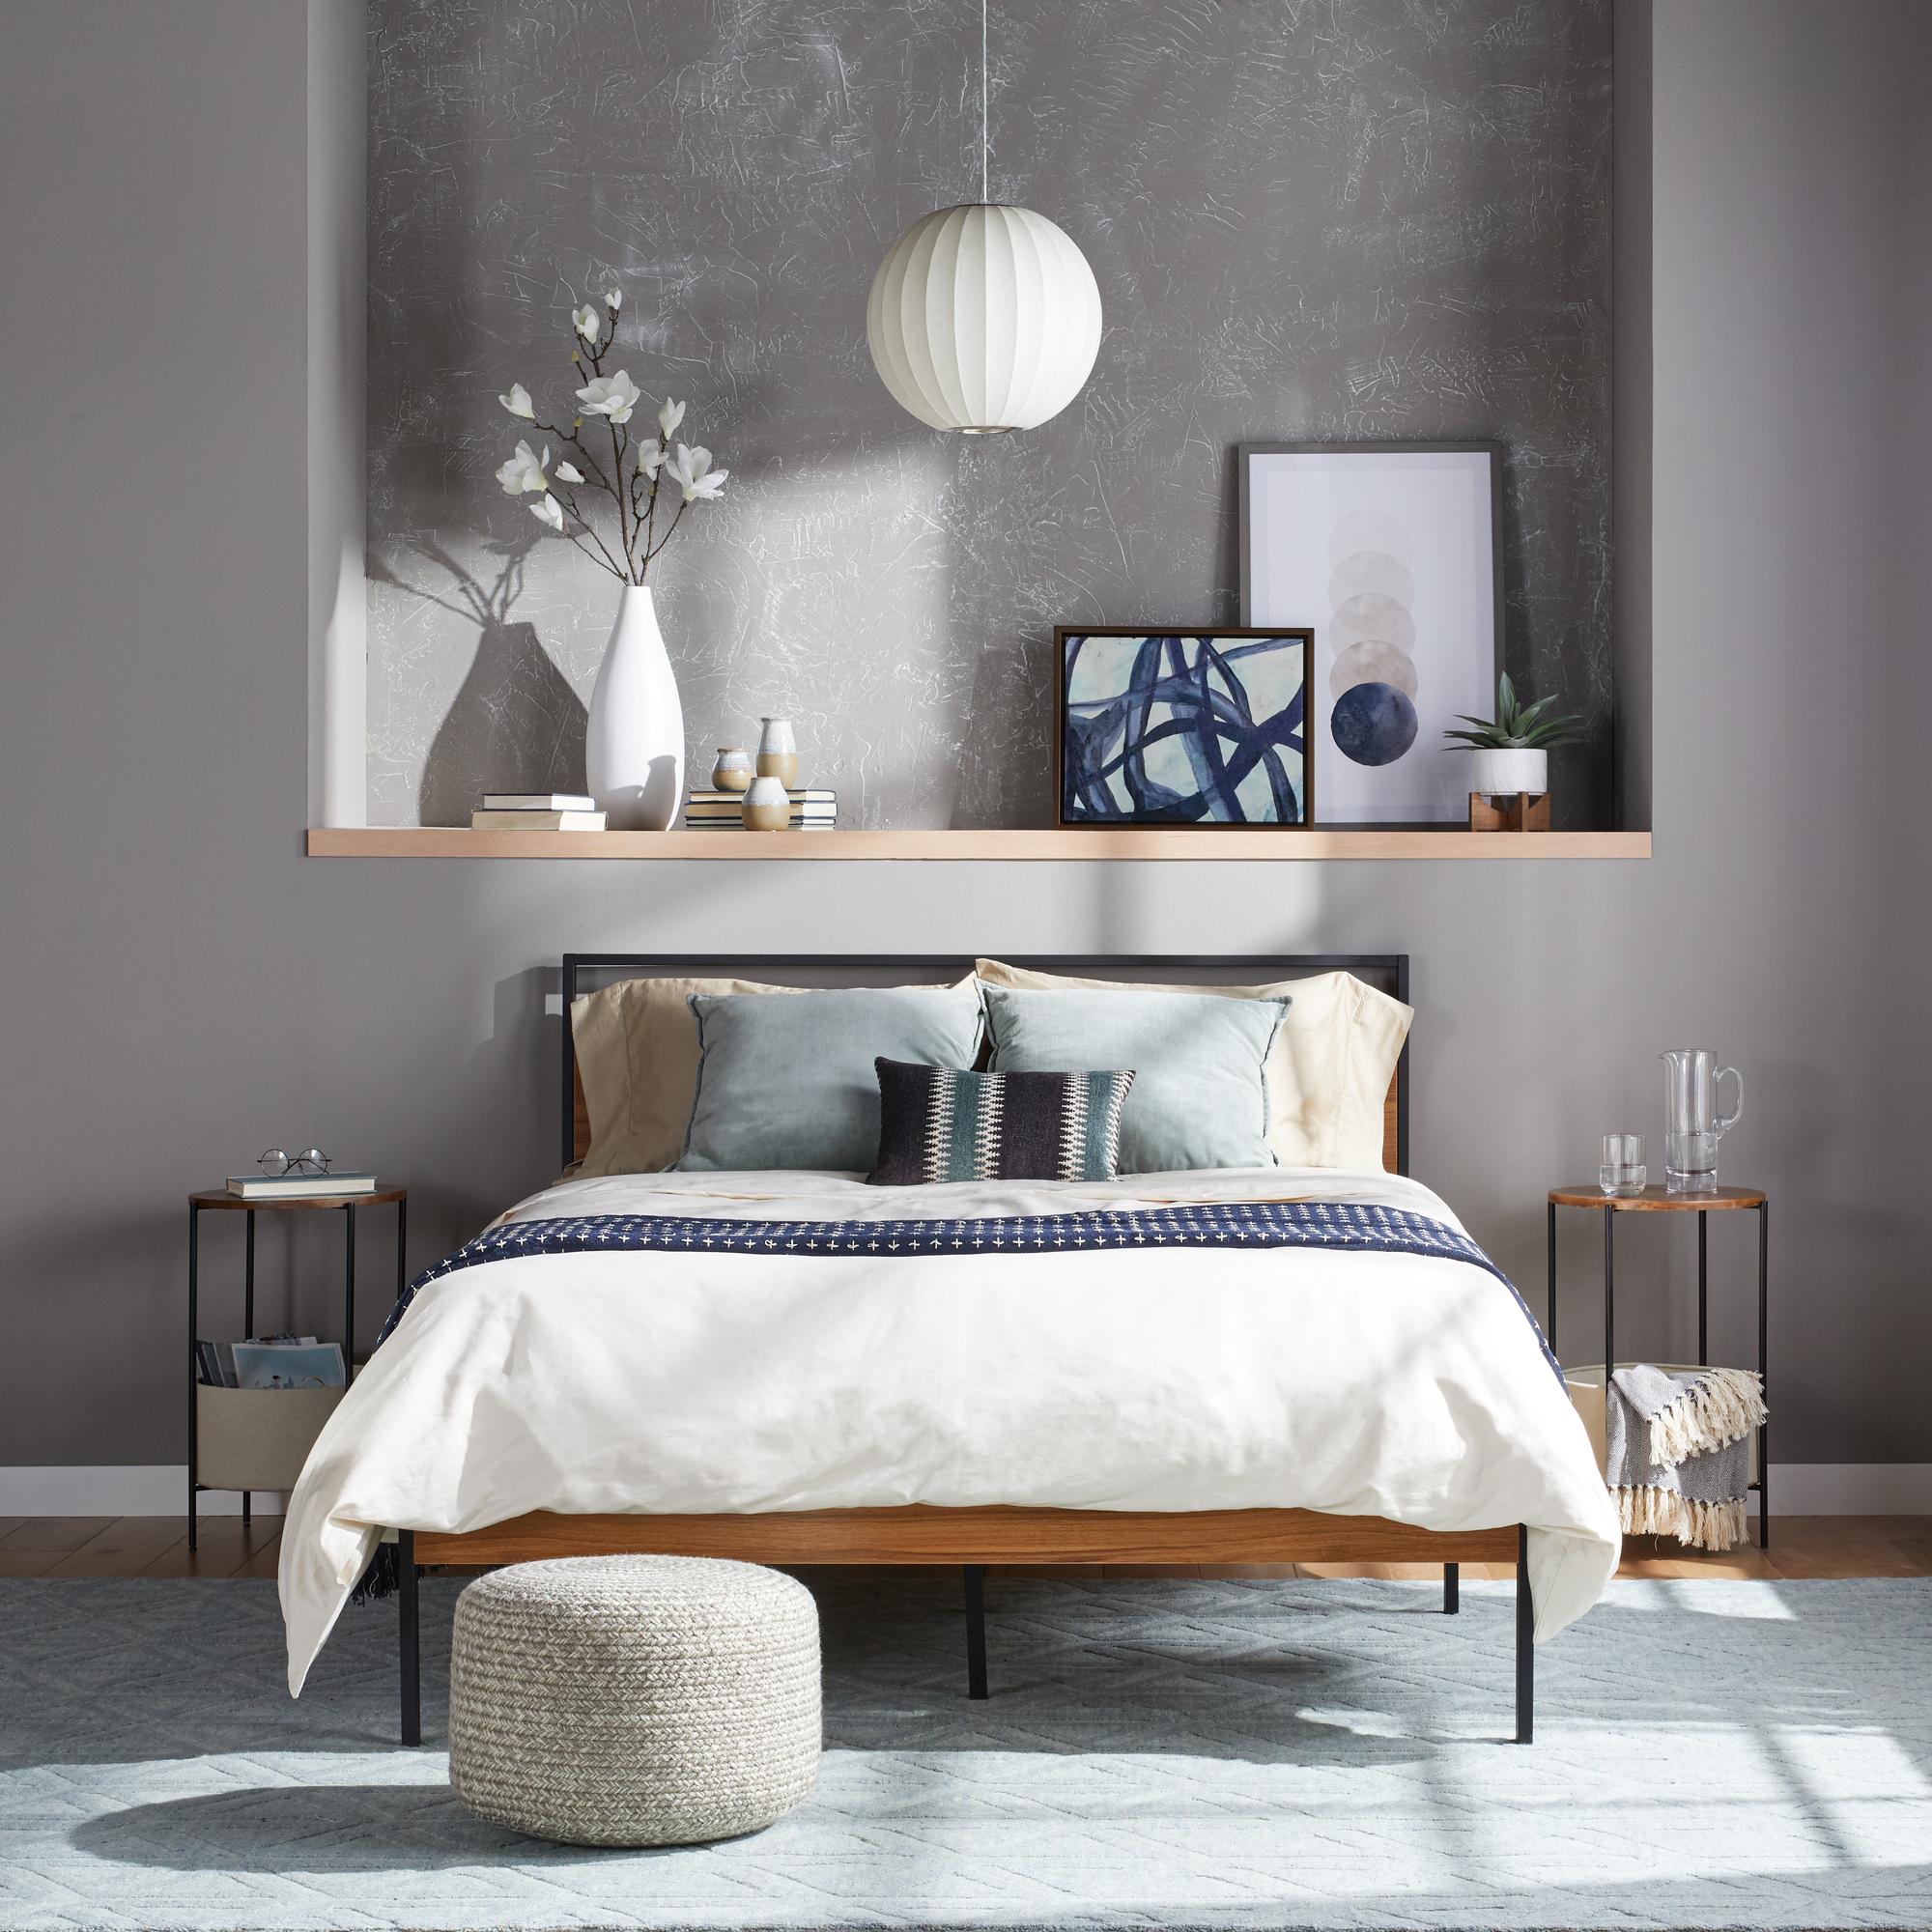 save an extra 10% on Select Bedroom Furniture*